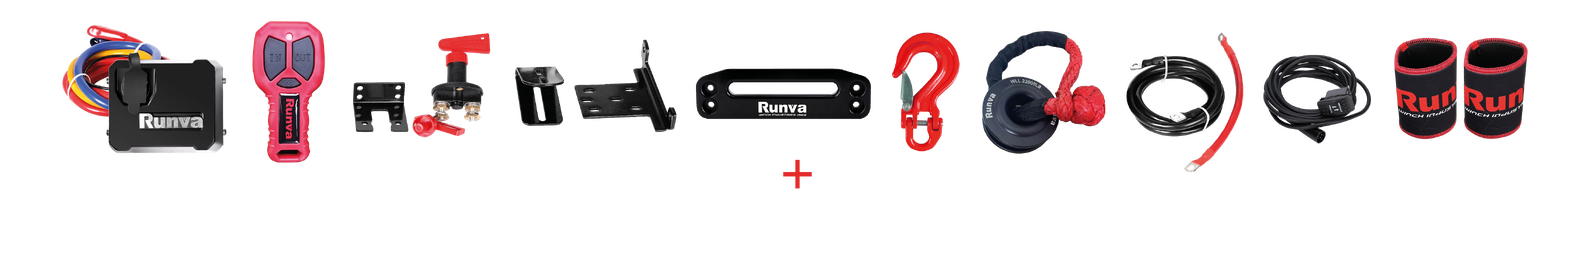 Runva 11XP PREMIUM RED 12V with Synthetic Rope (INCLUDES HANDHELD)